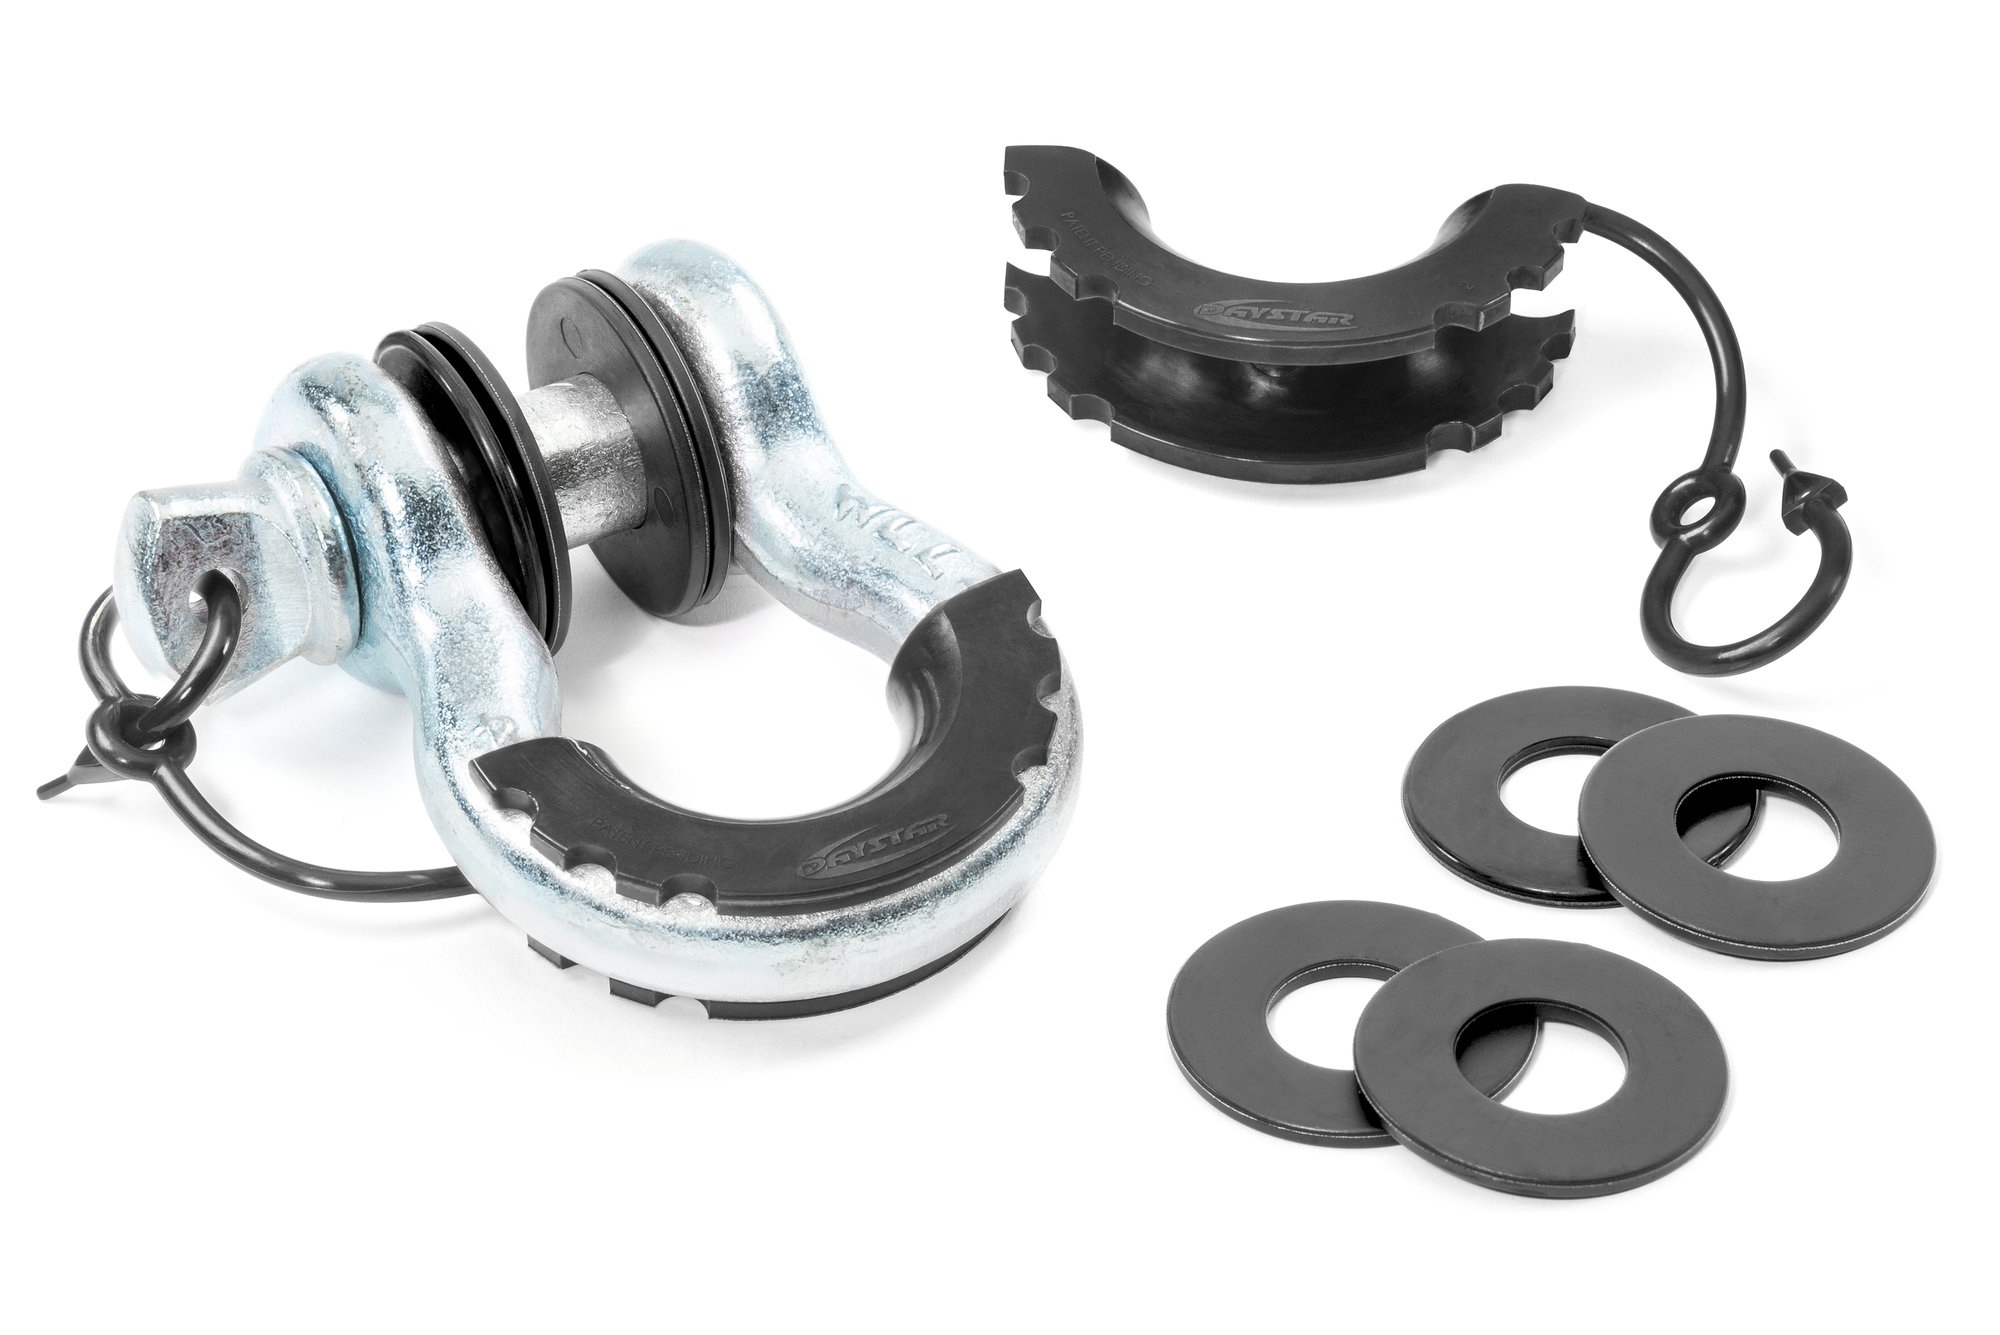 Daystar Locking D-Ring Isolator and Washers for 3/4" D-Ring Shackle |  Quadratec